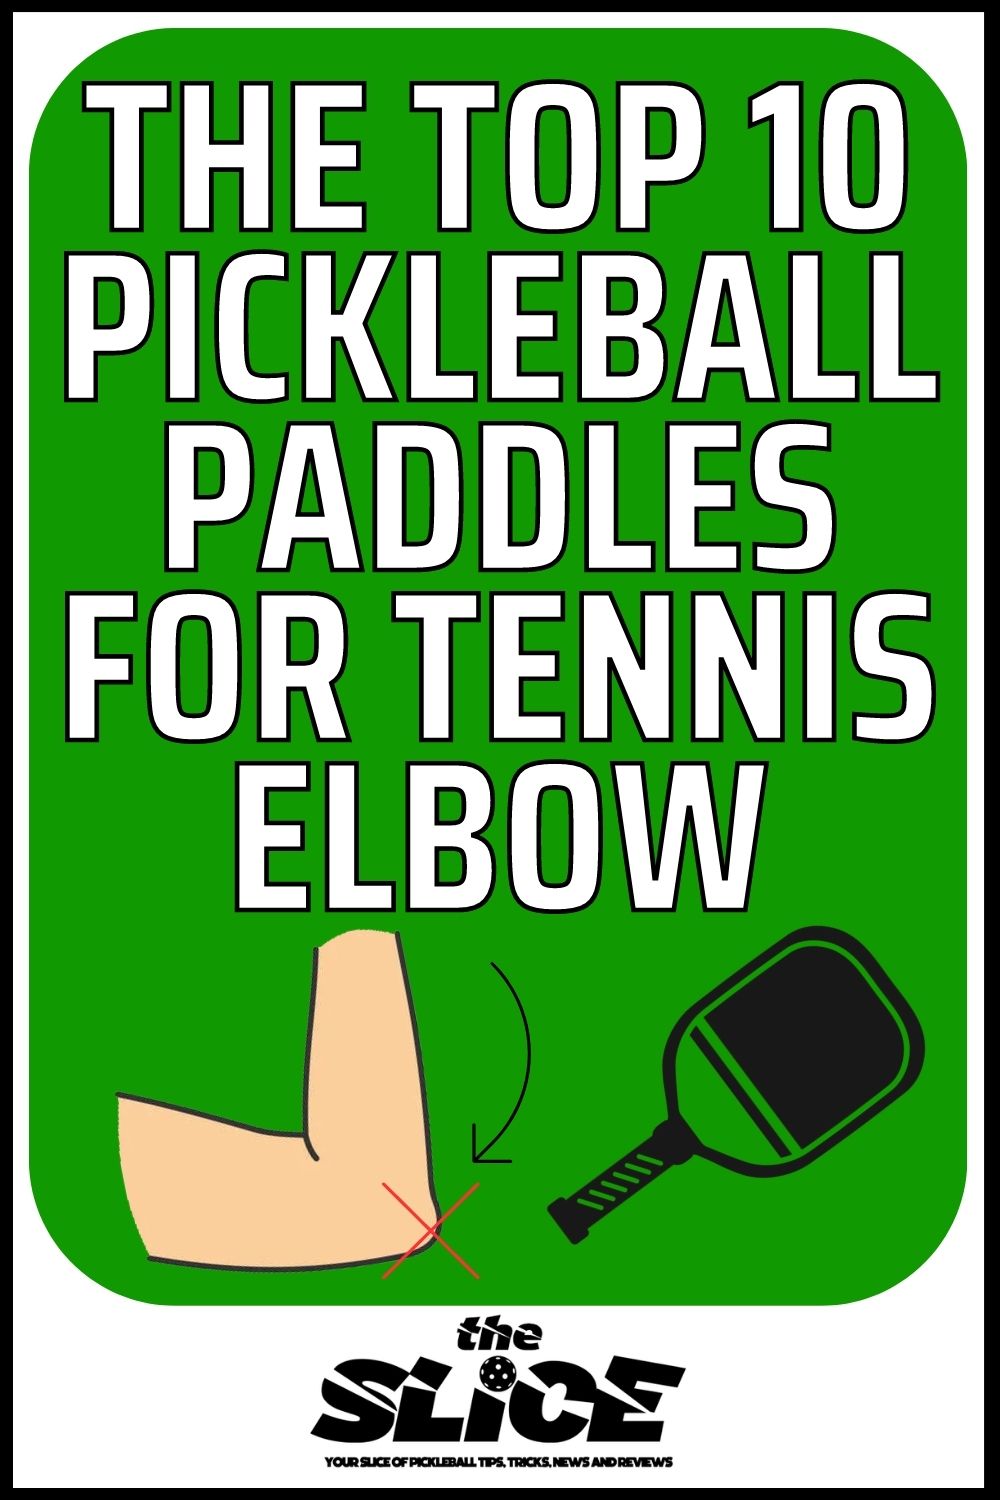 The Top Ten Pickleball Paddles for Tennis Elbow